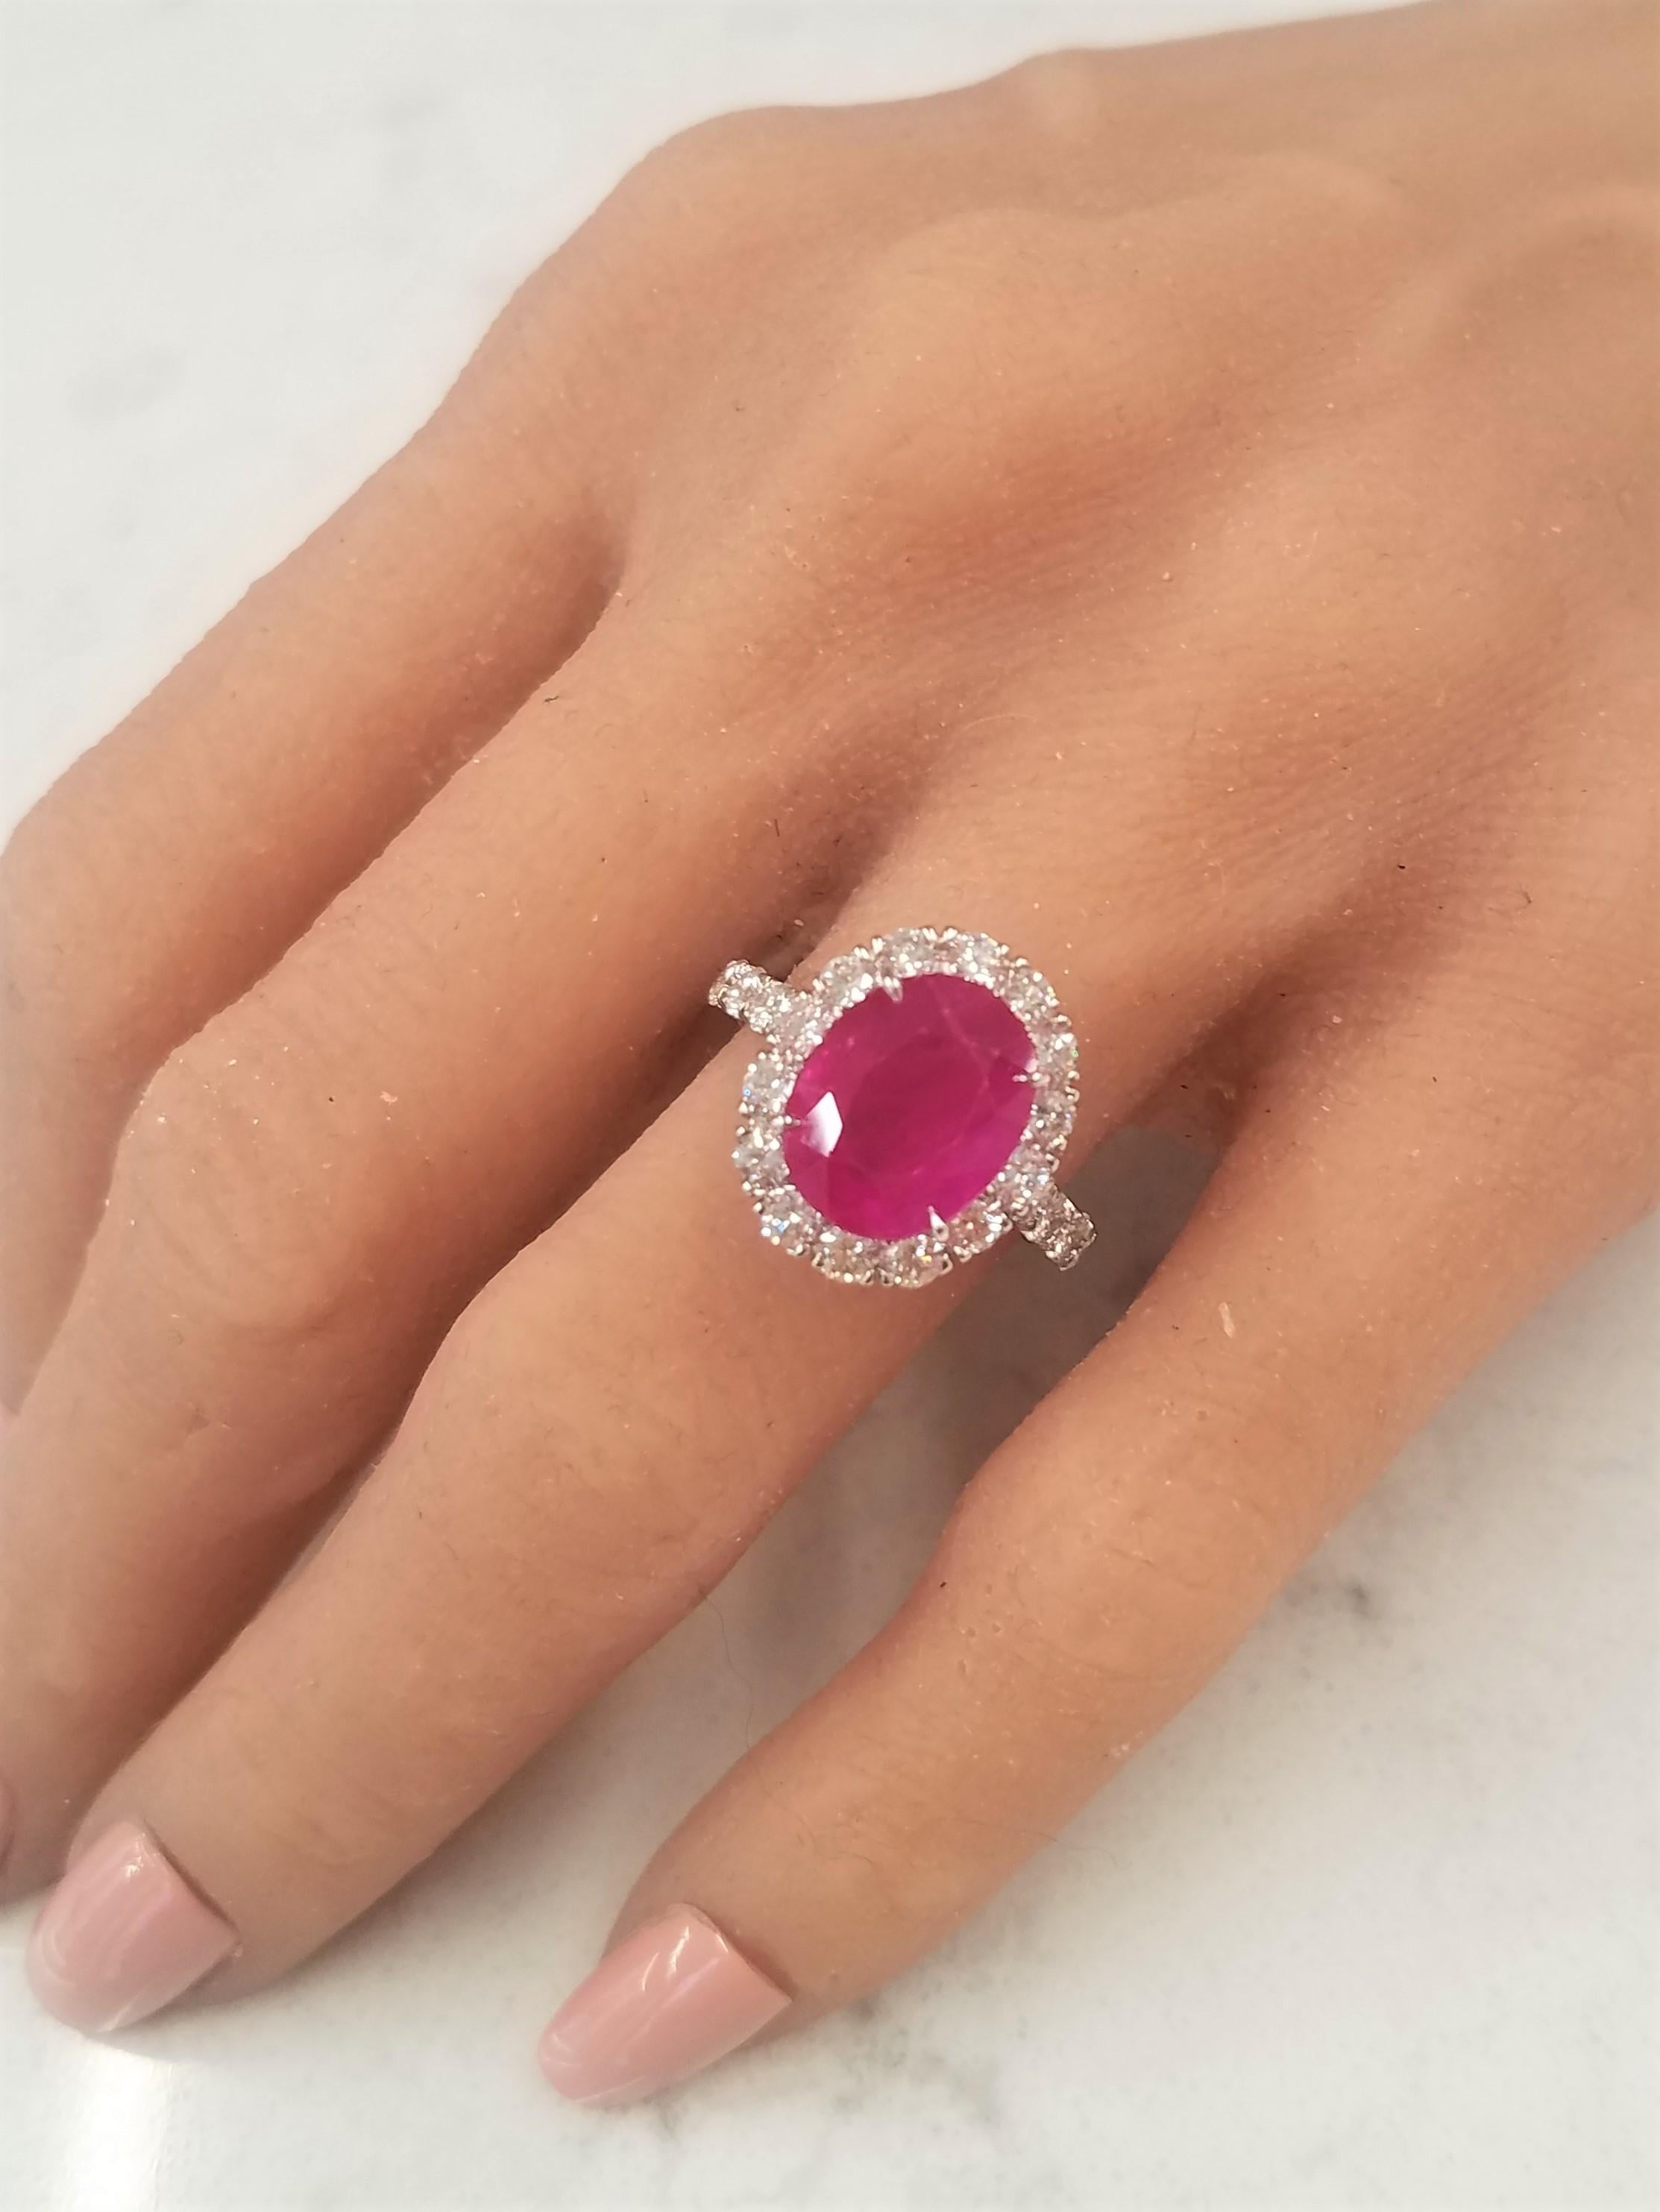 The richly saturated red makes this ruby ring quite desirable. The oval cut, GIA certified ruby is 5.17 carat. This gem is from Burma. Burmese rubies are the most sought after, collectors specifically look out for them. The color is deep red, its